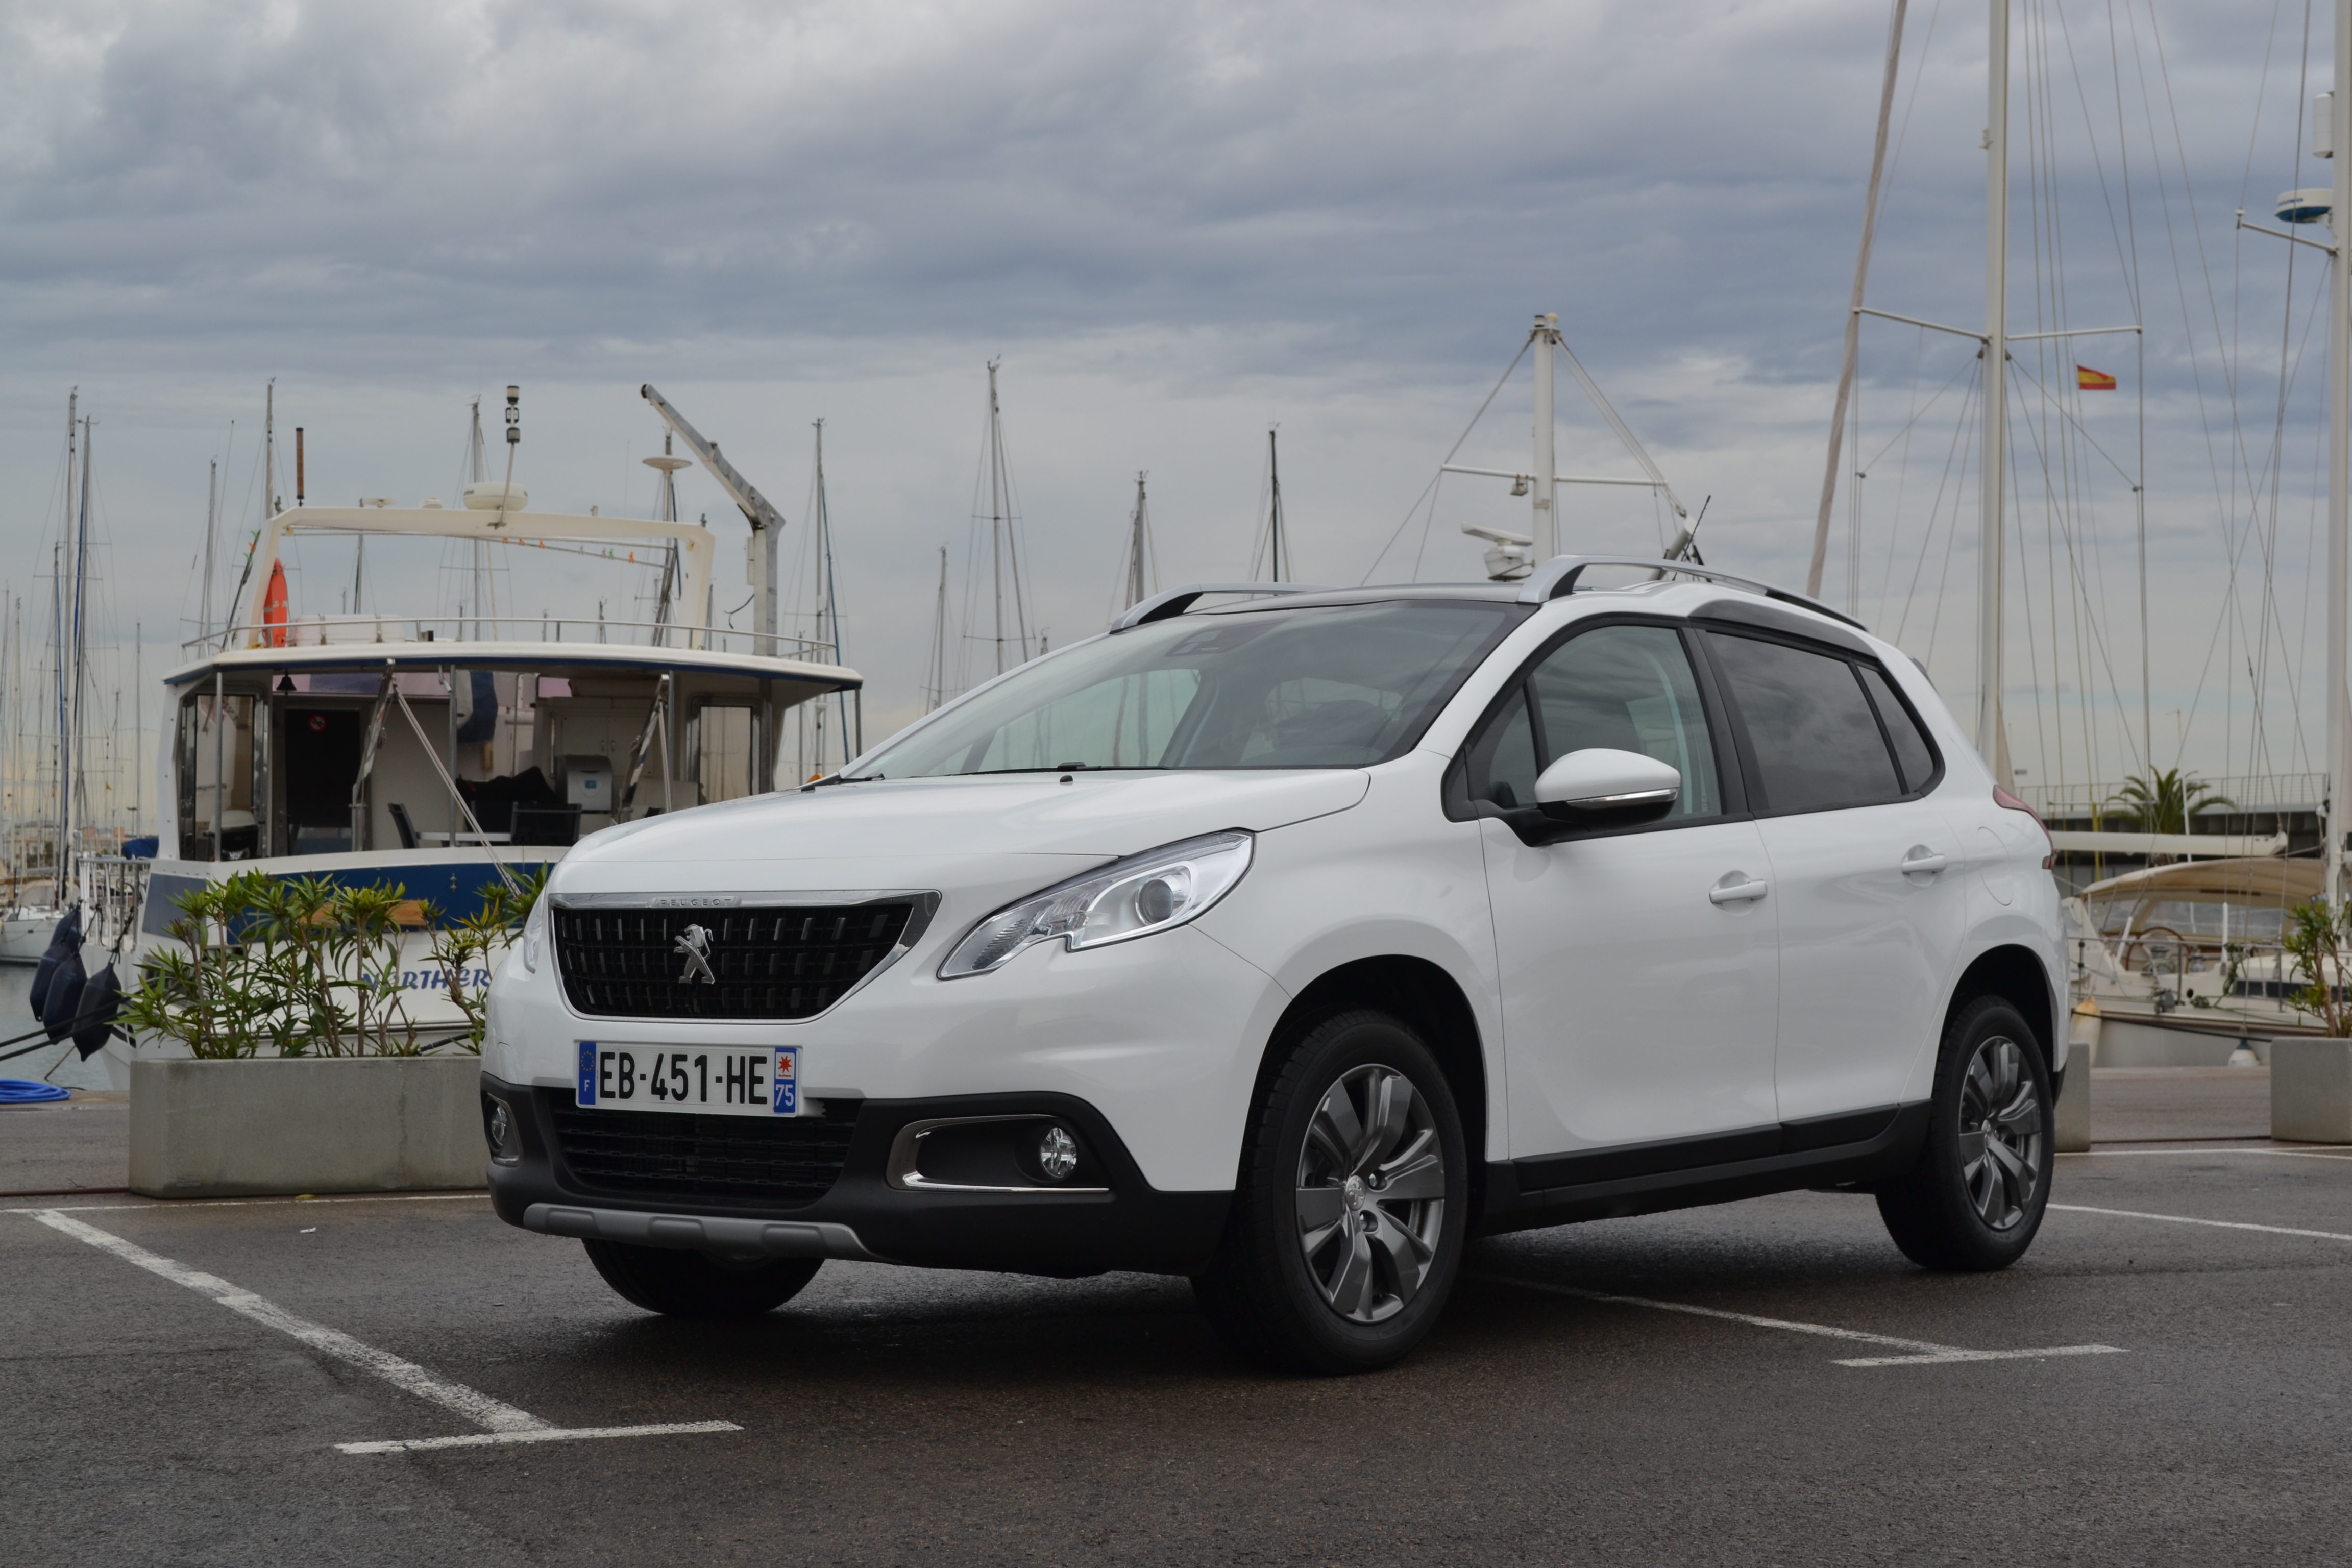 Peugeot, 2008, SUV, SUV compact, essai, testdrive, grip control, restylage, peugeot 2008